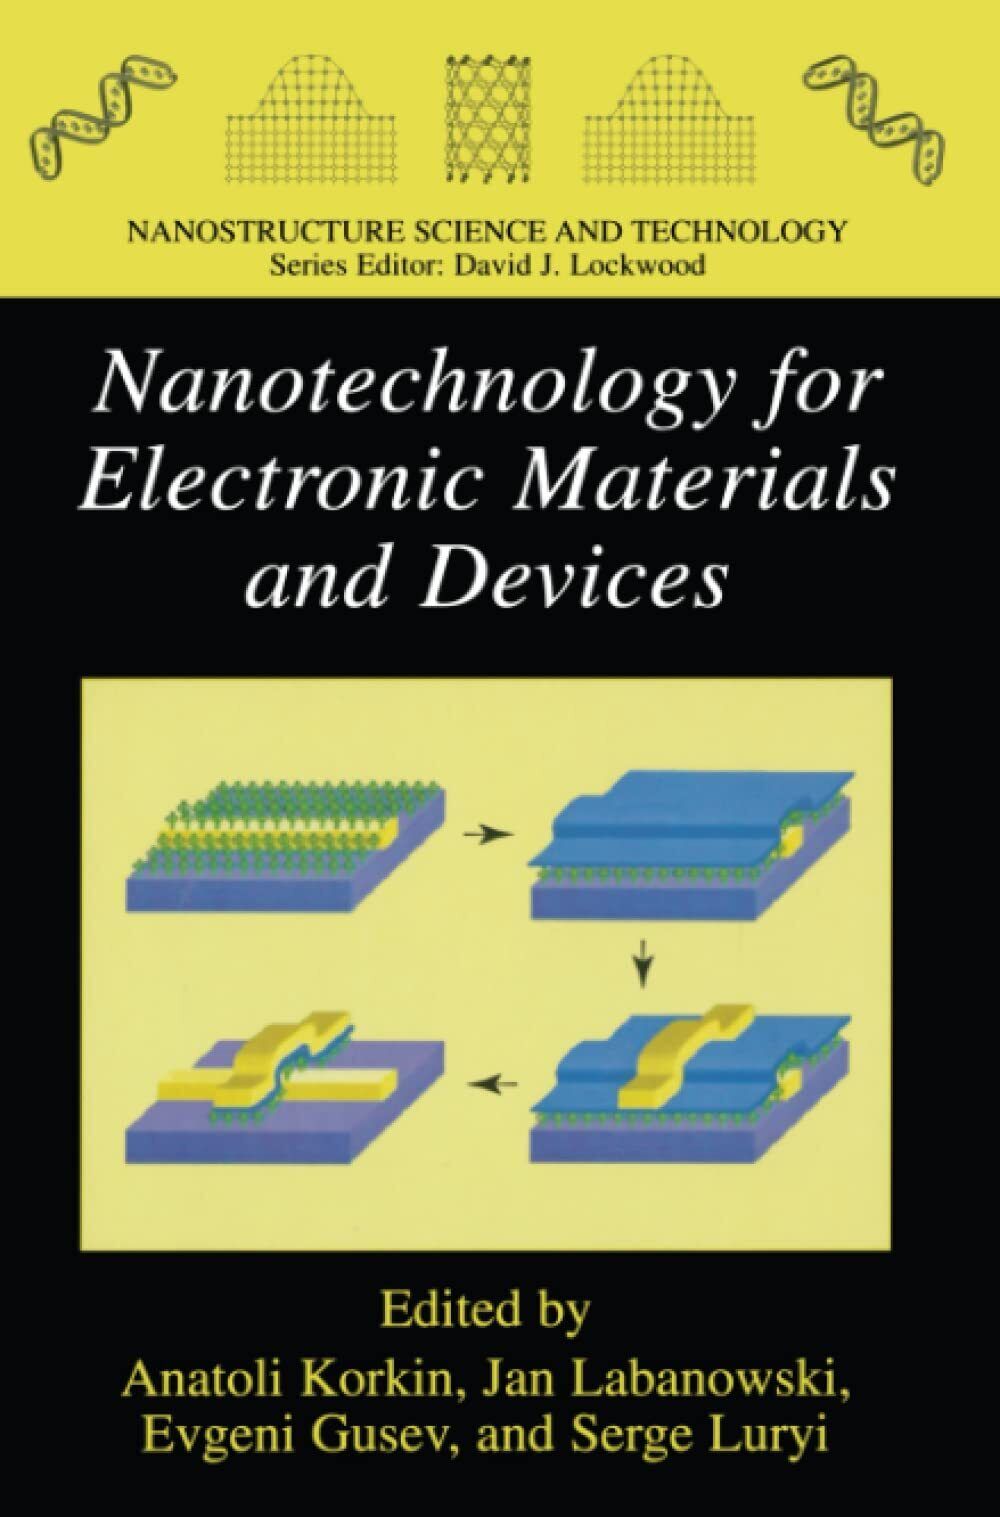 Nanotechnology for Electronic Materials and Devices - Anatoli Korkin - 2011